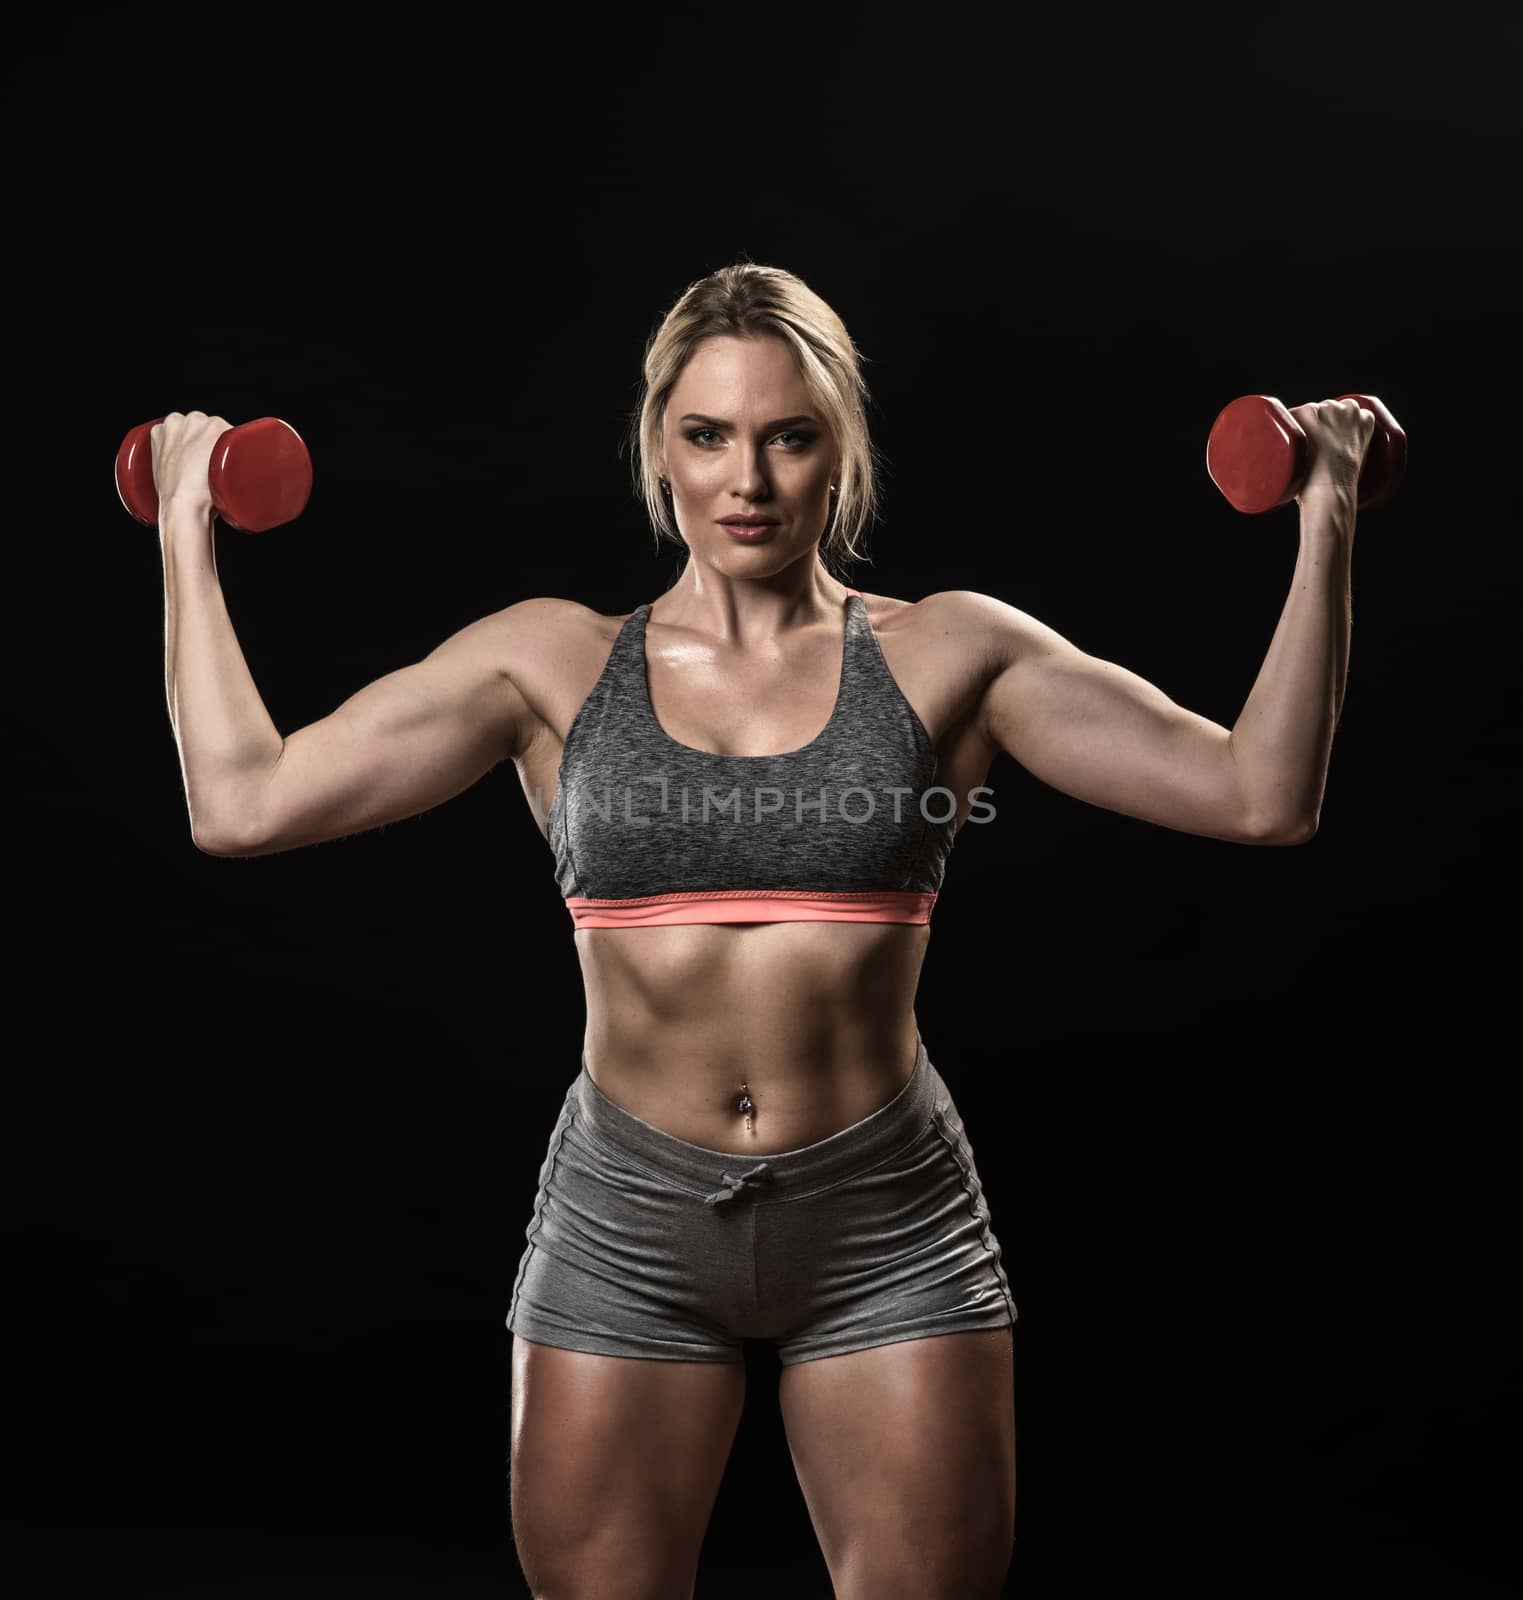 Beautiful muscular woman lifting dumbbells isolated on black background